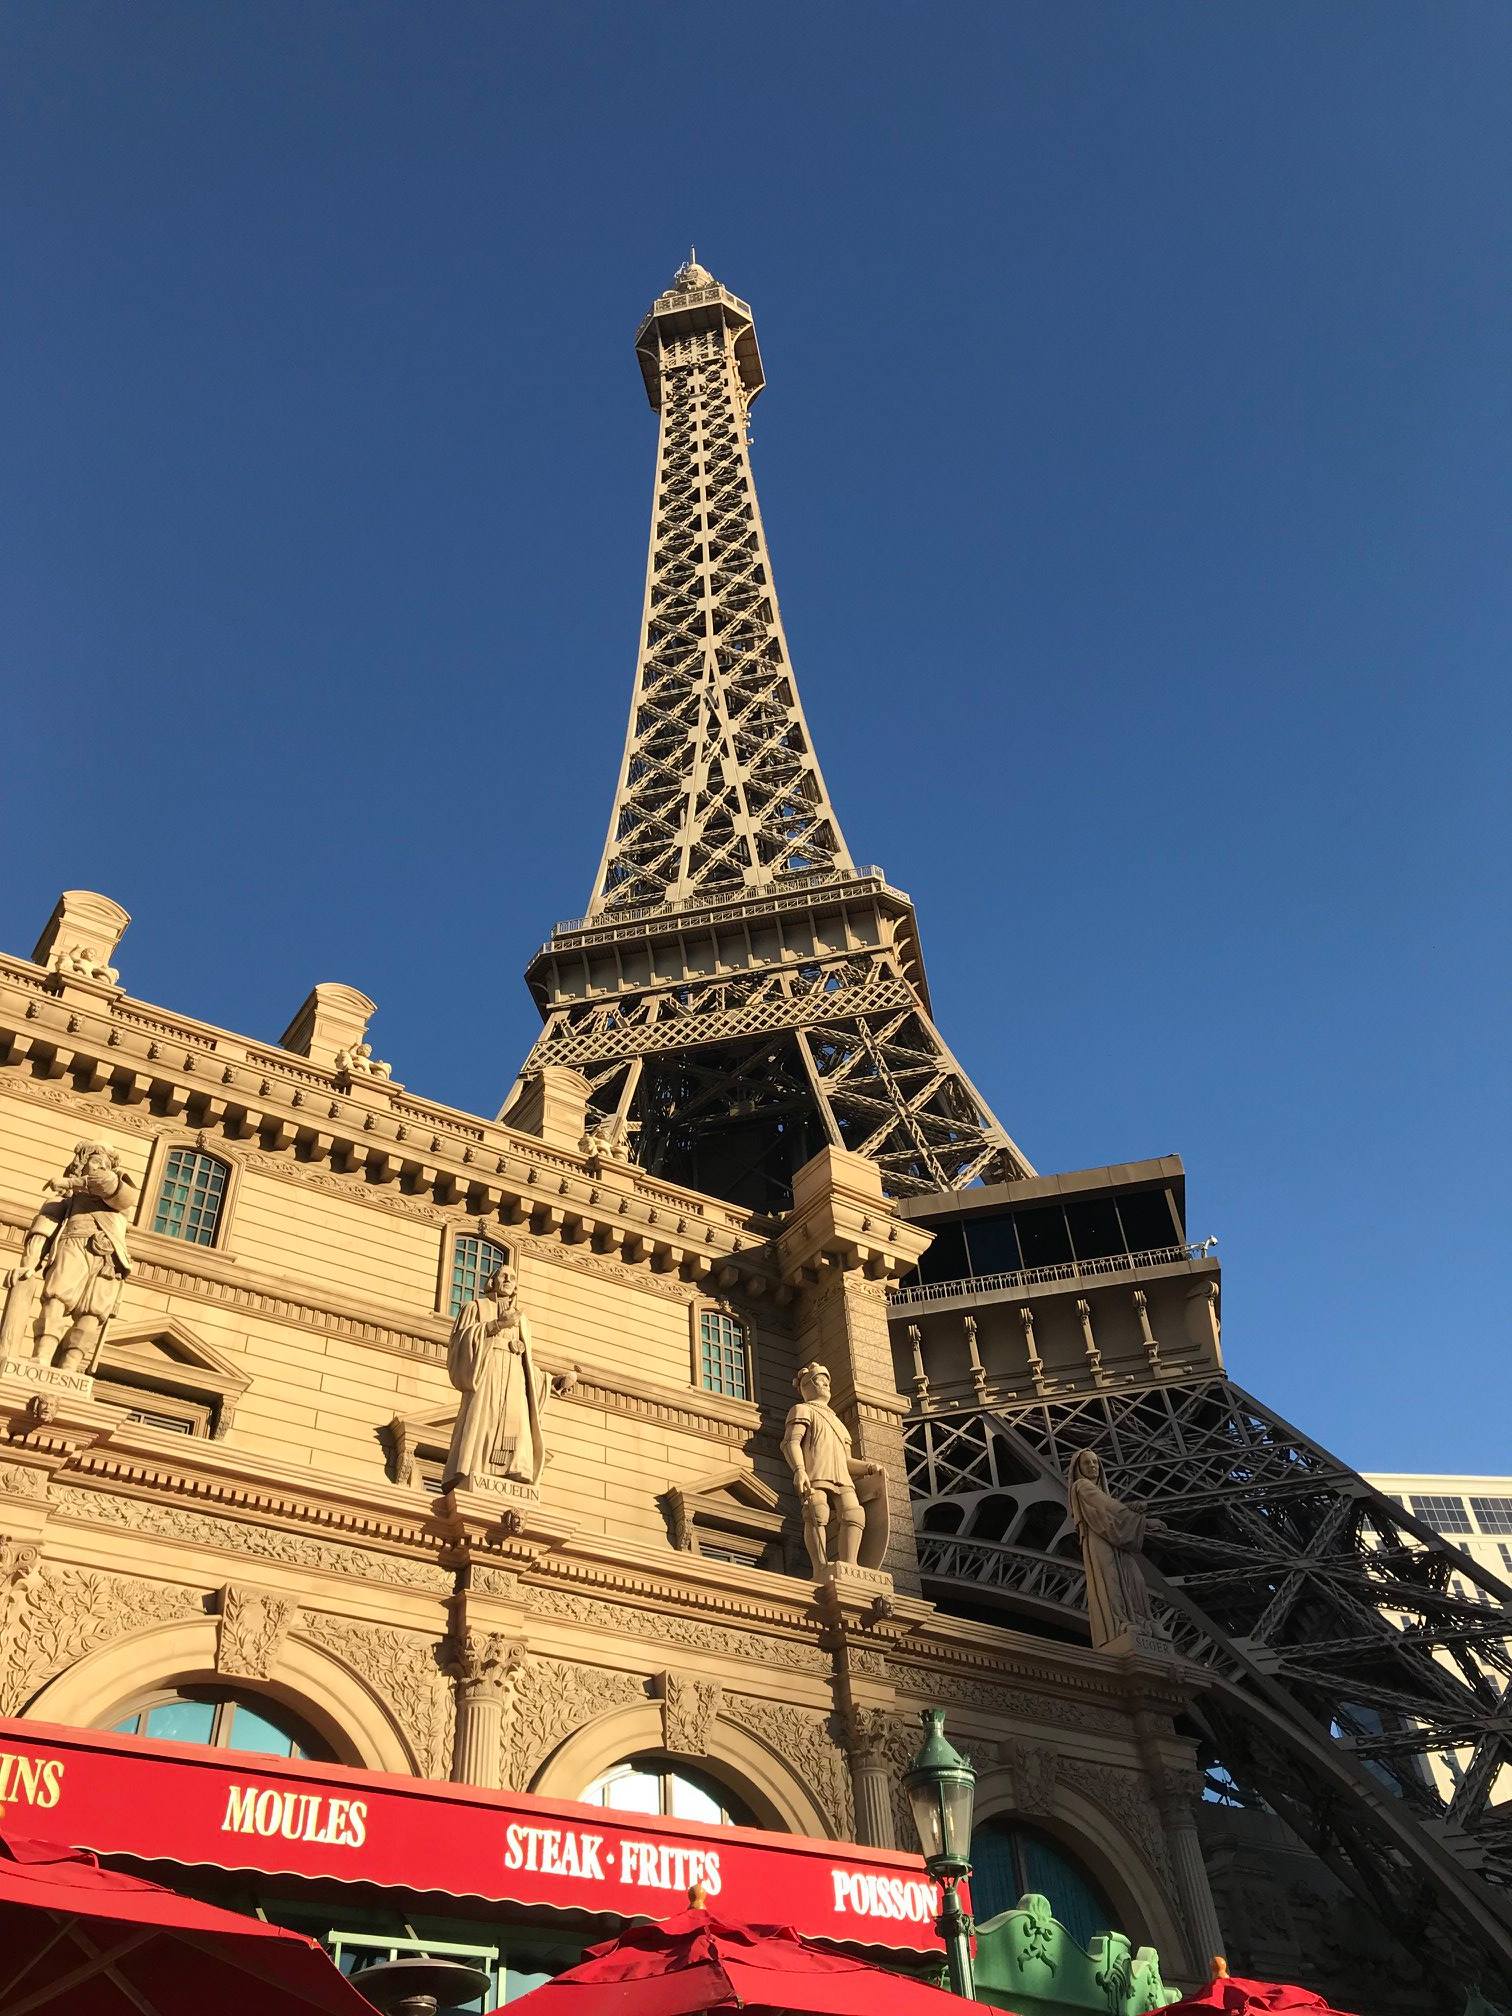 Photograph of Eiffle Tower in Las vegas